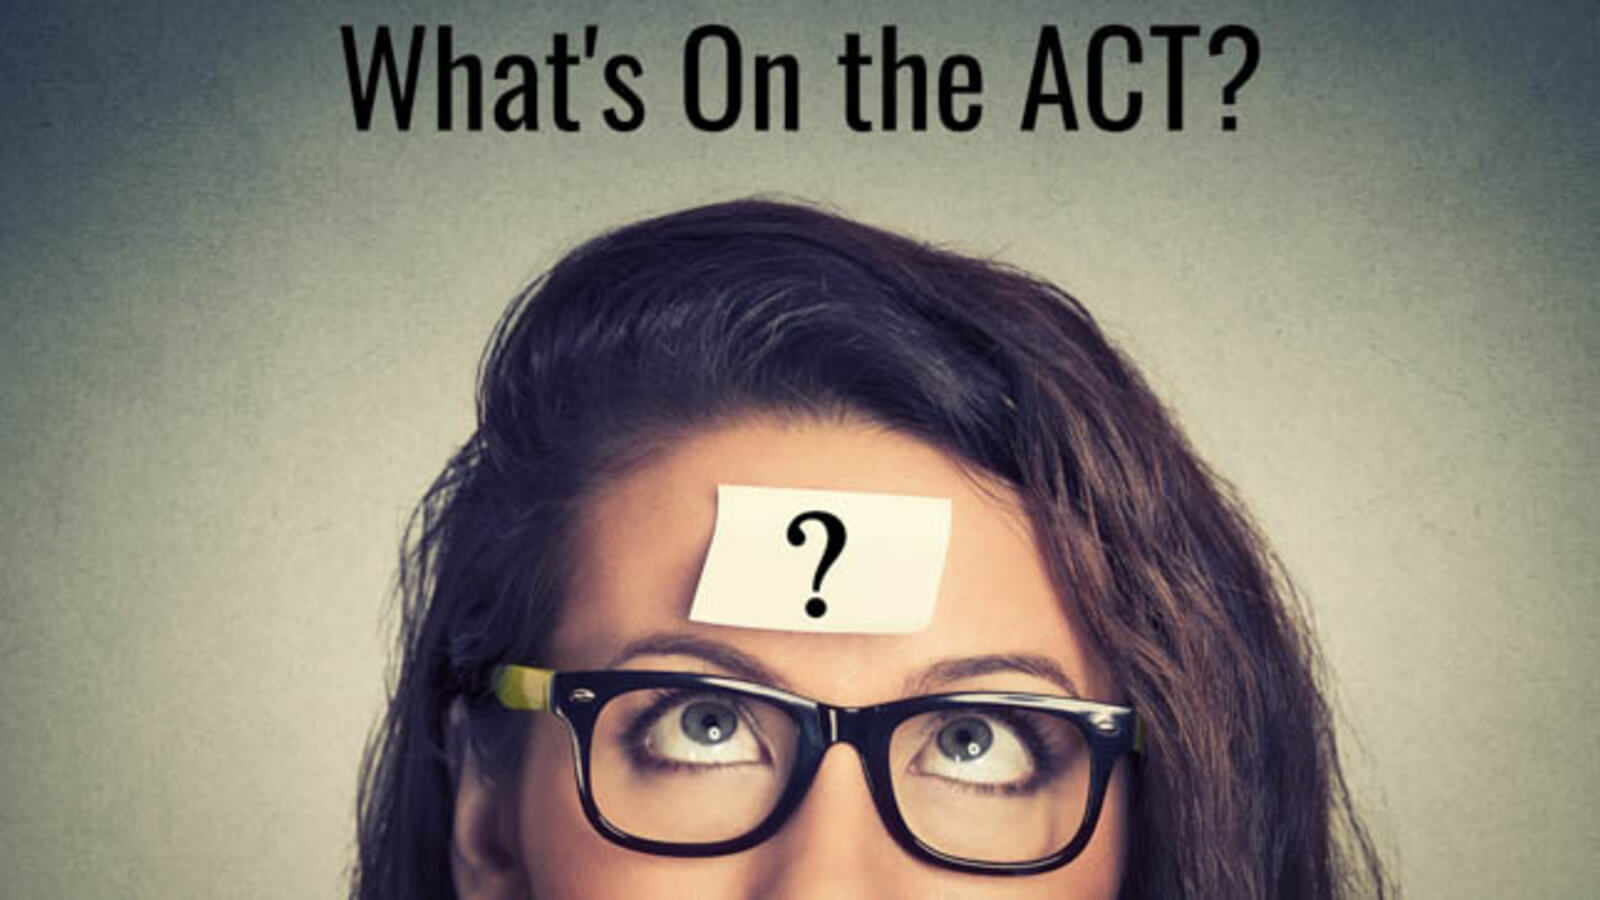 What's On the ACT